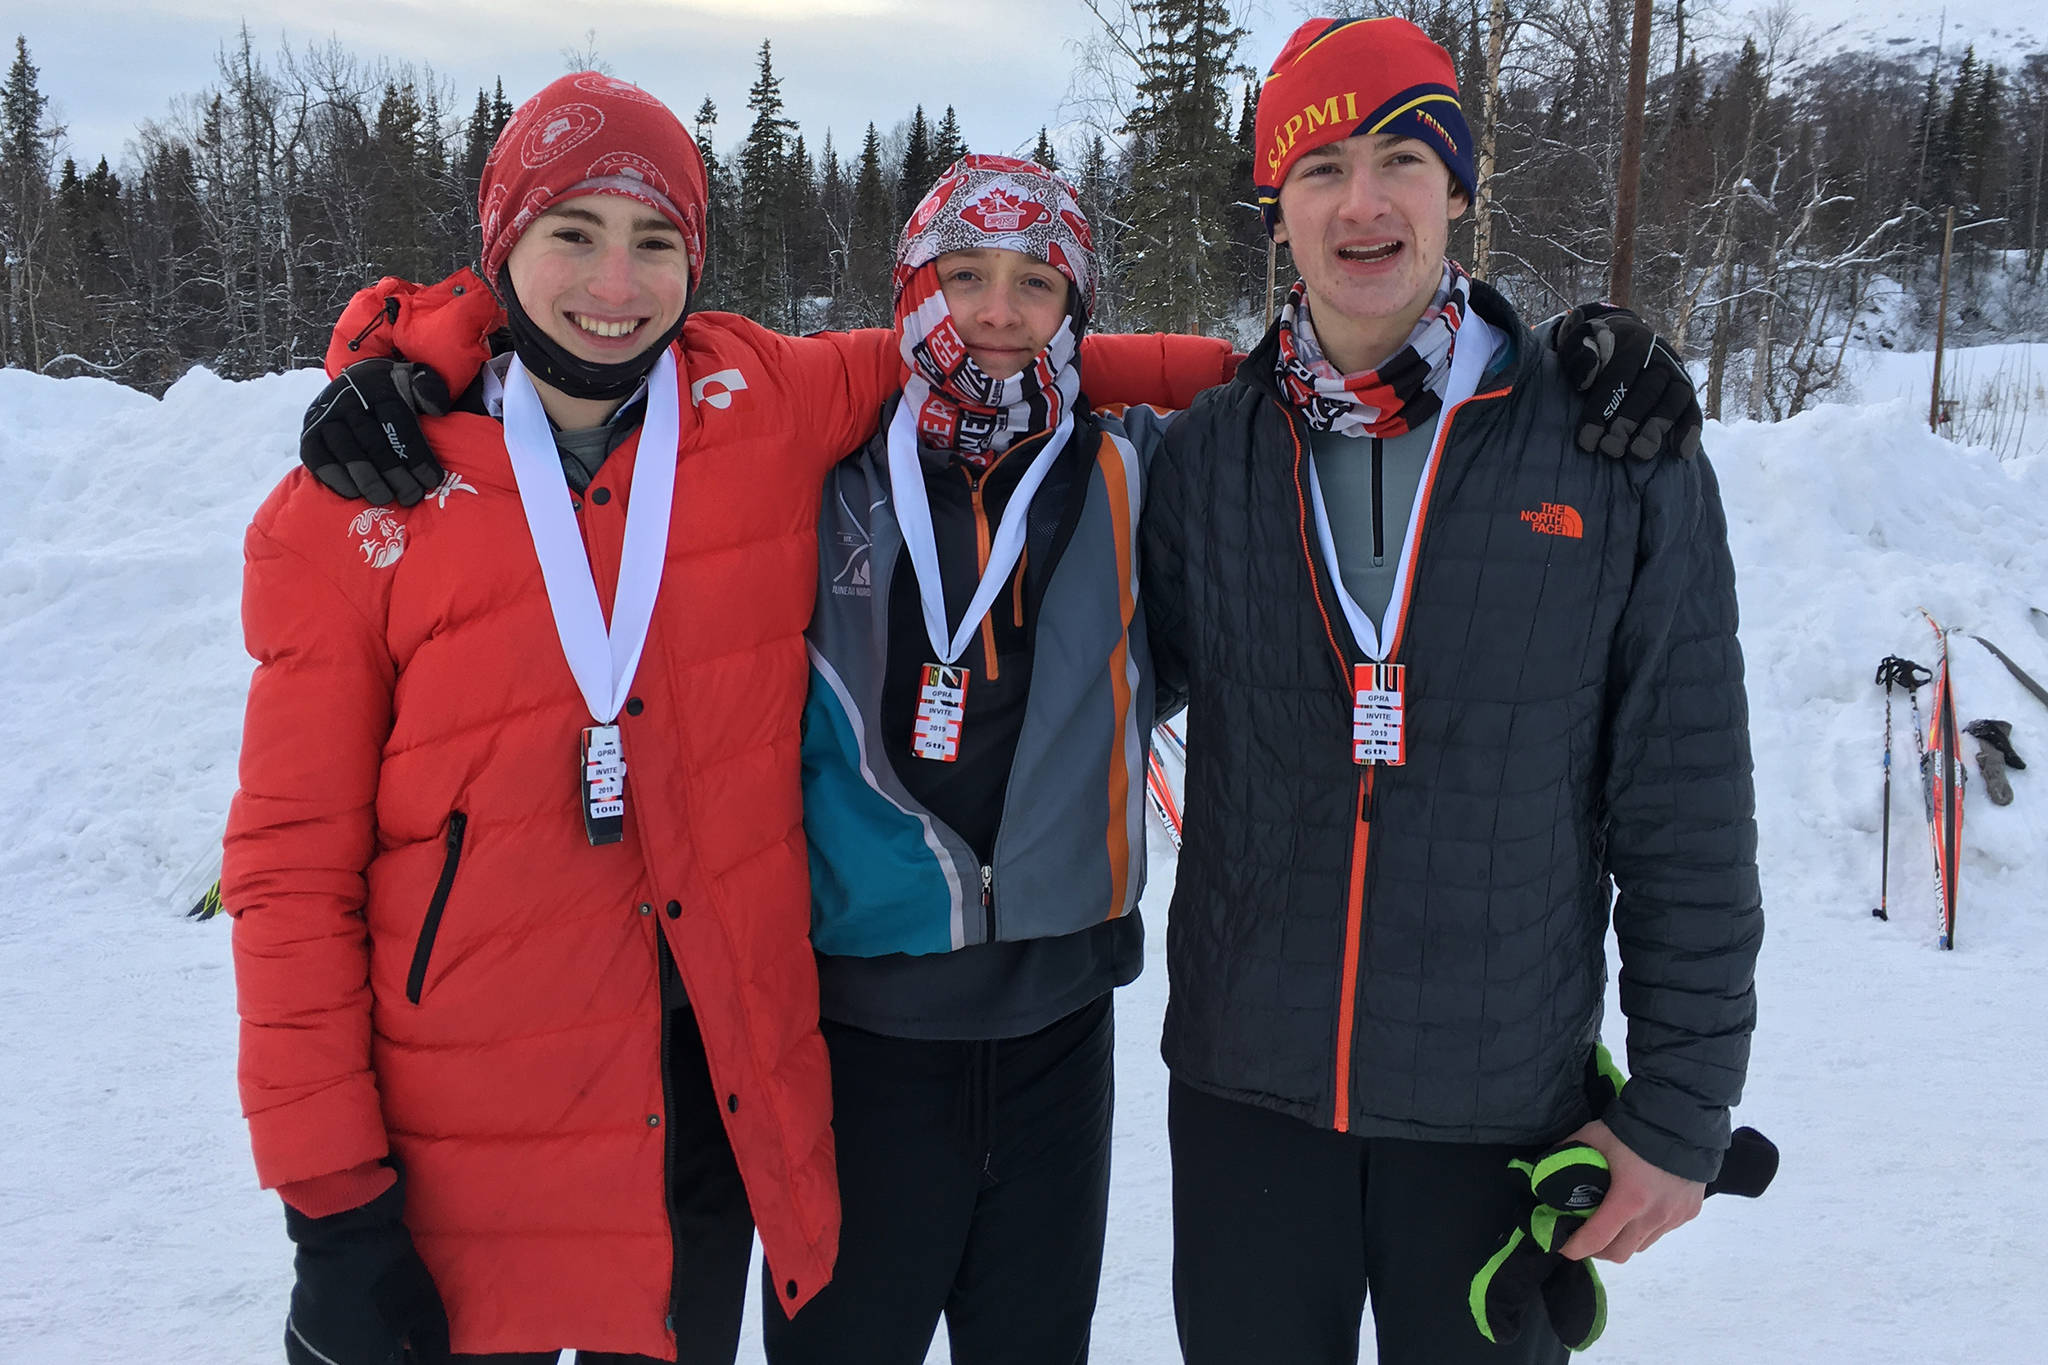 Juneau Nordic Ski Team members (from left) Finn Morley, Arne Ellefson-Carnes and Clem Taylor-Roth pose for a photo after earning medals for their top-10 finishes at the Government Peak Recreation Area Invitational in Palmer on Saturday. Awards were given to the top-10 skiers based on the cumulative time of a 5-kilometer interval-start freestyle race on Friday and 5-kilometer mass-start classic race on Saturday. Ellefson-Carnes finished fifth, Taylor-Roth sixth and Morley 10th. (Courtesy Photo | Merry Ellefson)